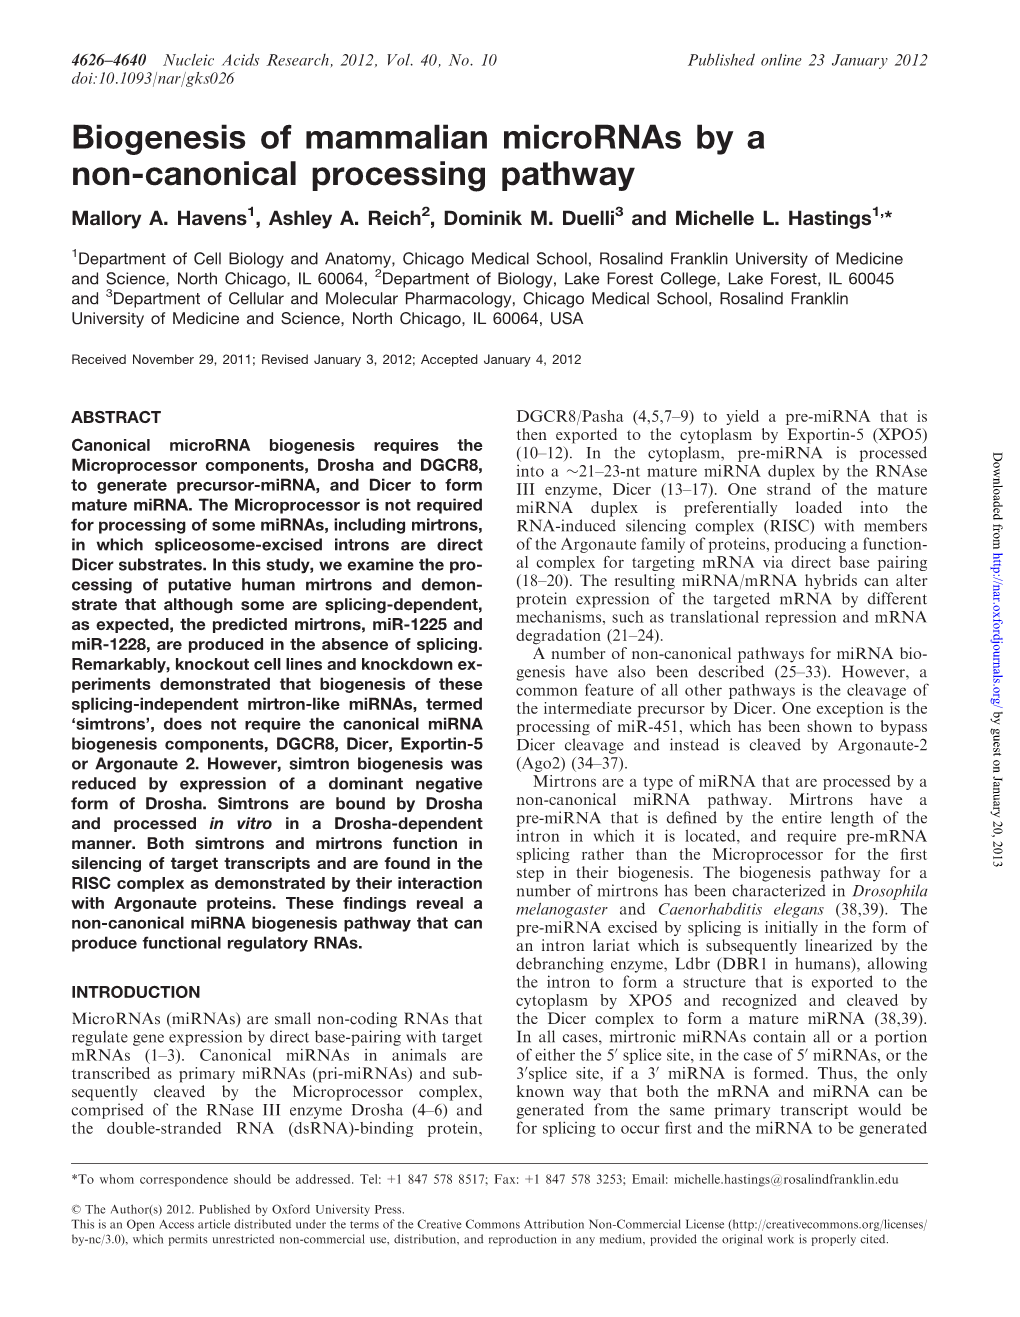 Biogenesis of Mammalian Micrornas by a Non-Canonical Processing Pathway Mallory A